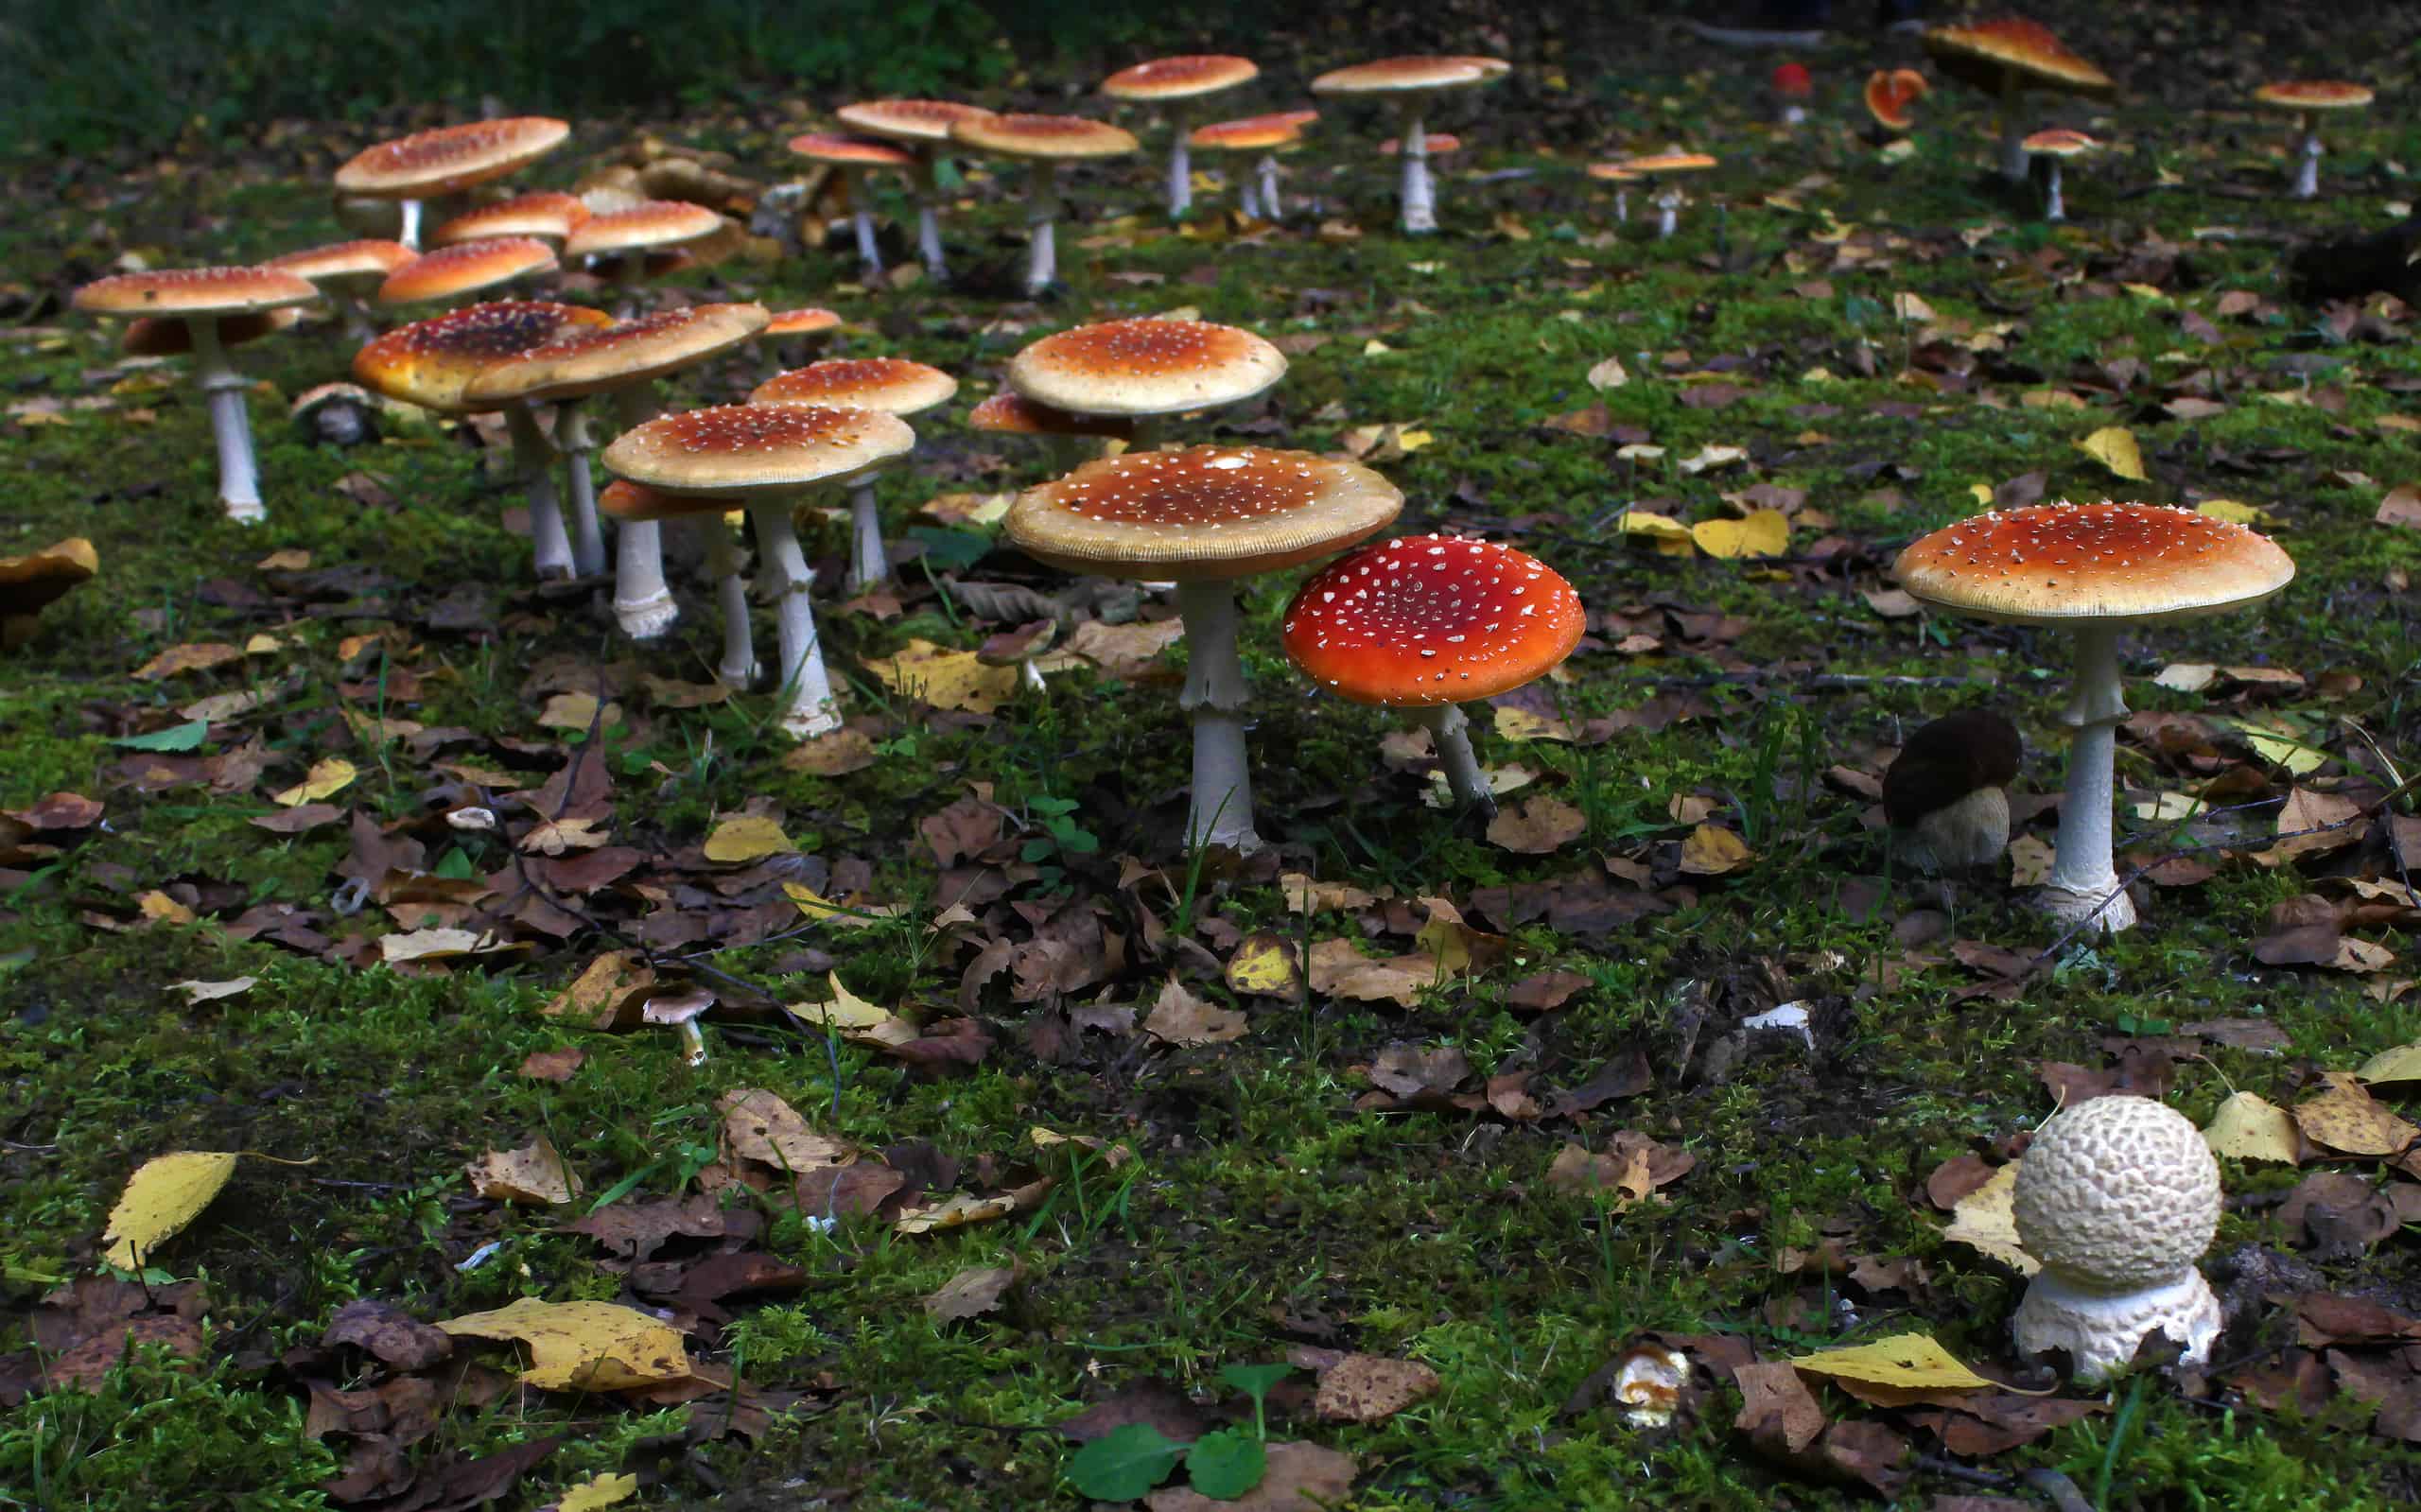 Fairy ring of death cup (fly agaric) mushrooms